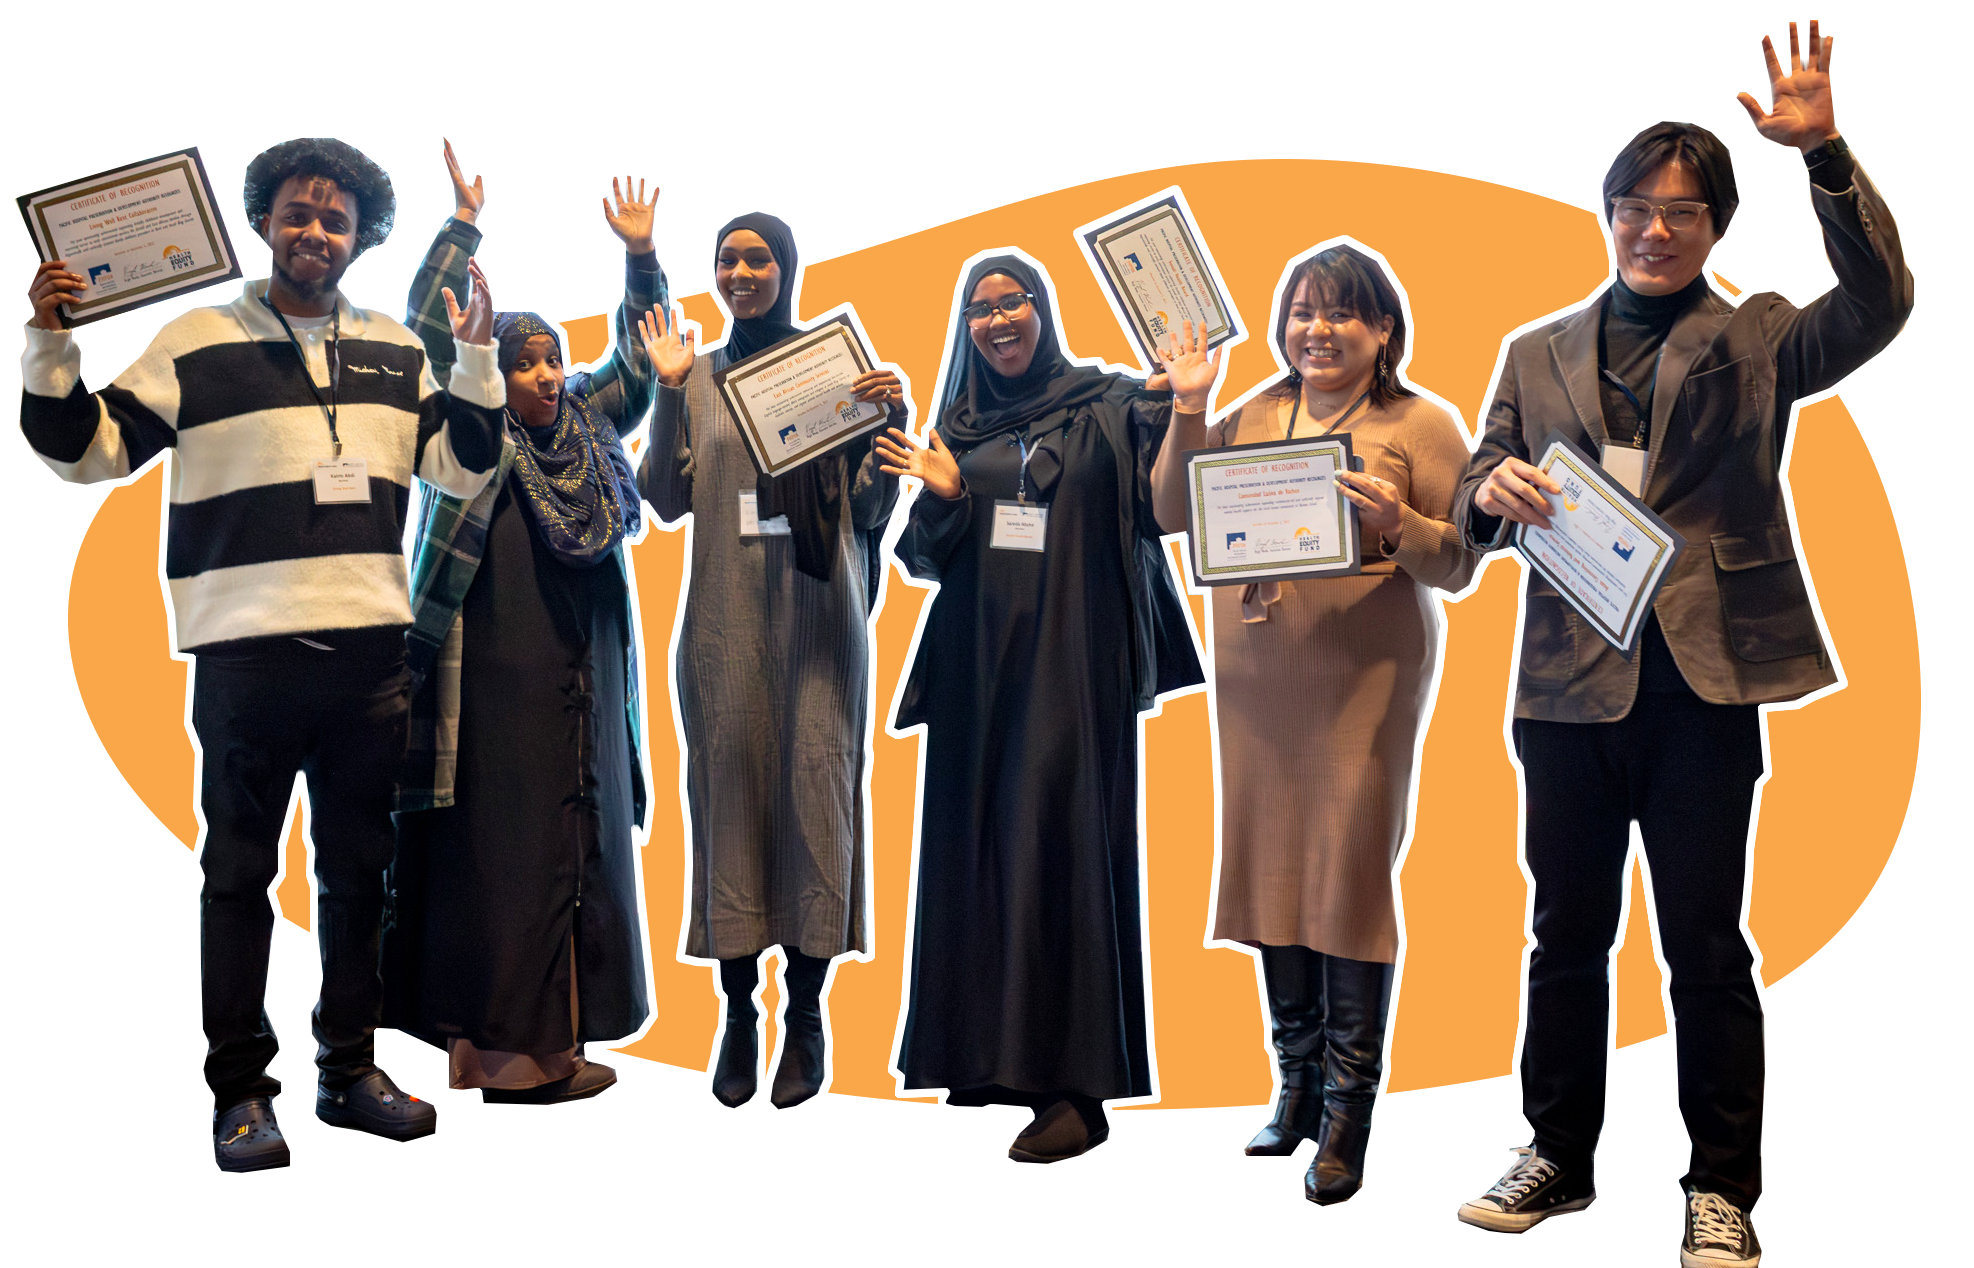 Six people smiling and standing with their hands and certificate of recognitions up